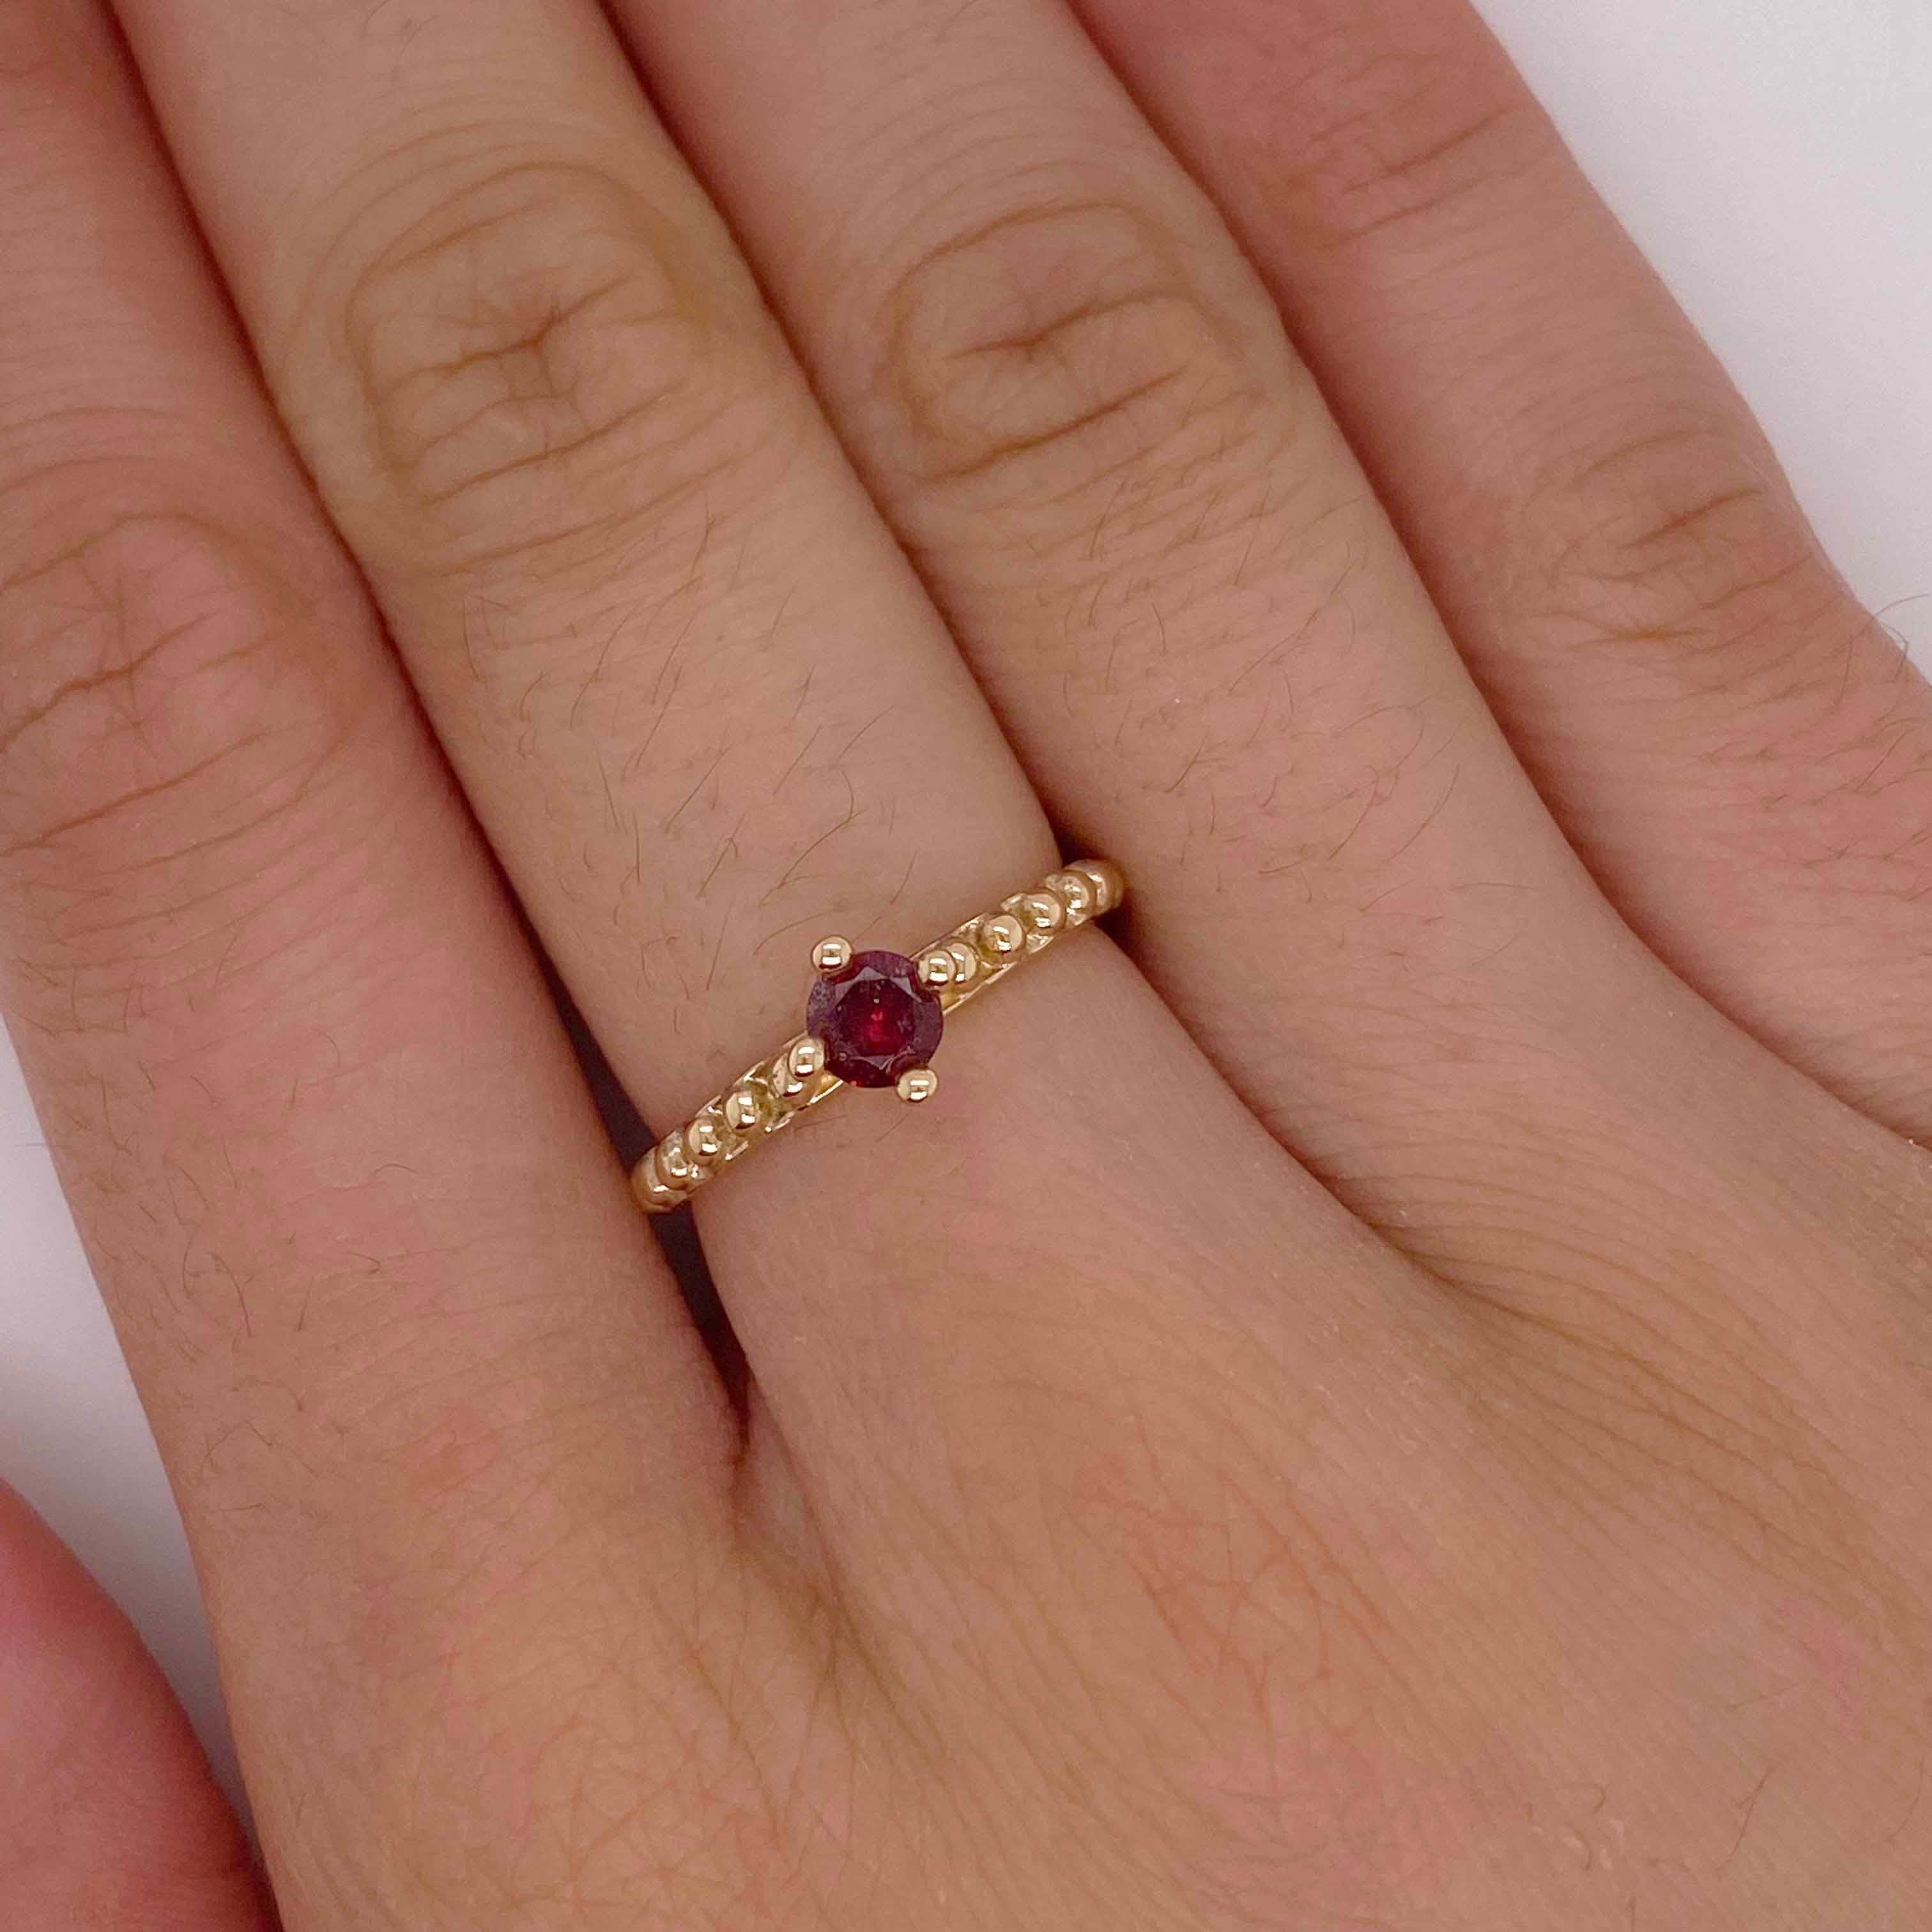 For Sale:  Garnet Solitaire Ring, Yellow Gold, Beaded Band, .45 Carat Round Garnet 2